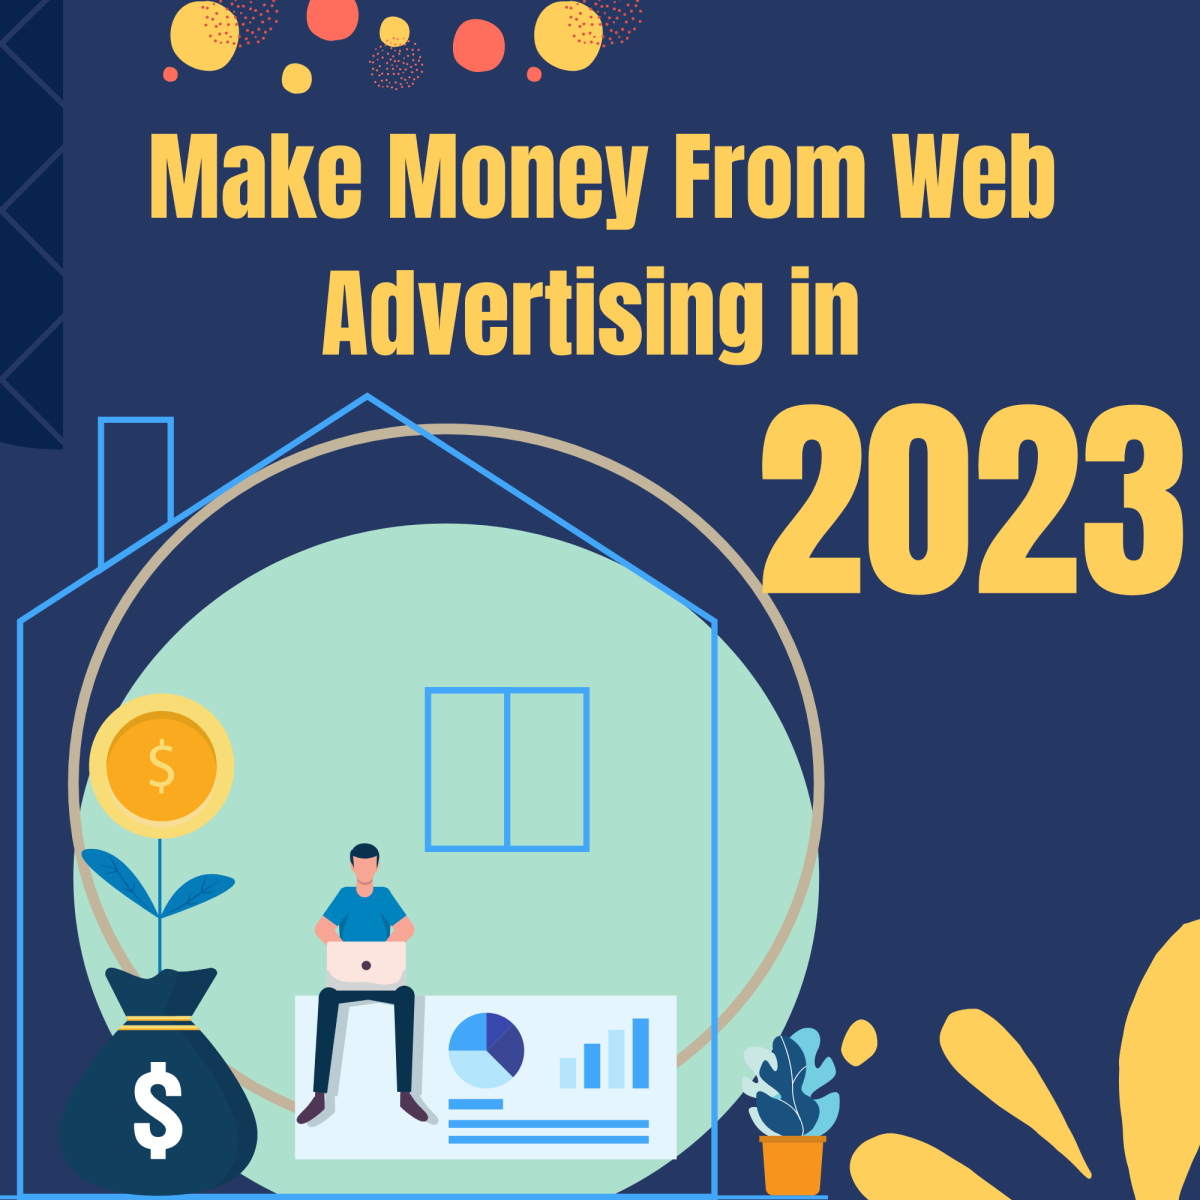 Tips to Make Money From Web Advertising in 2023